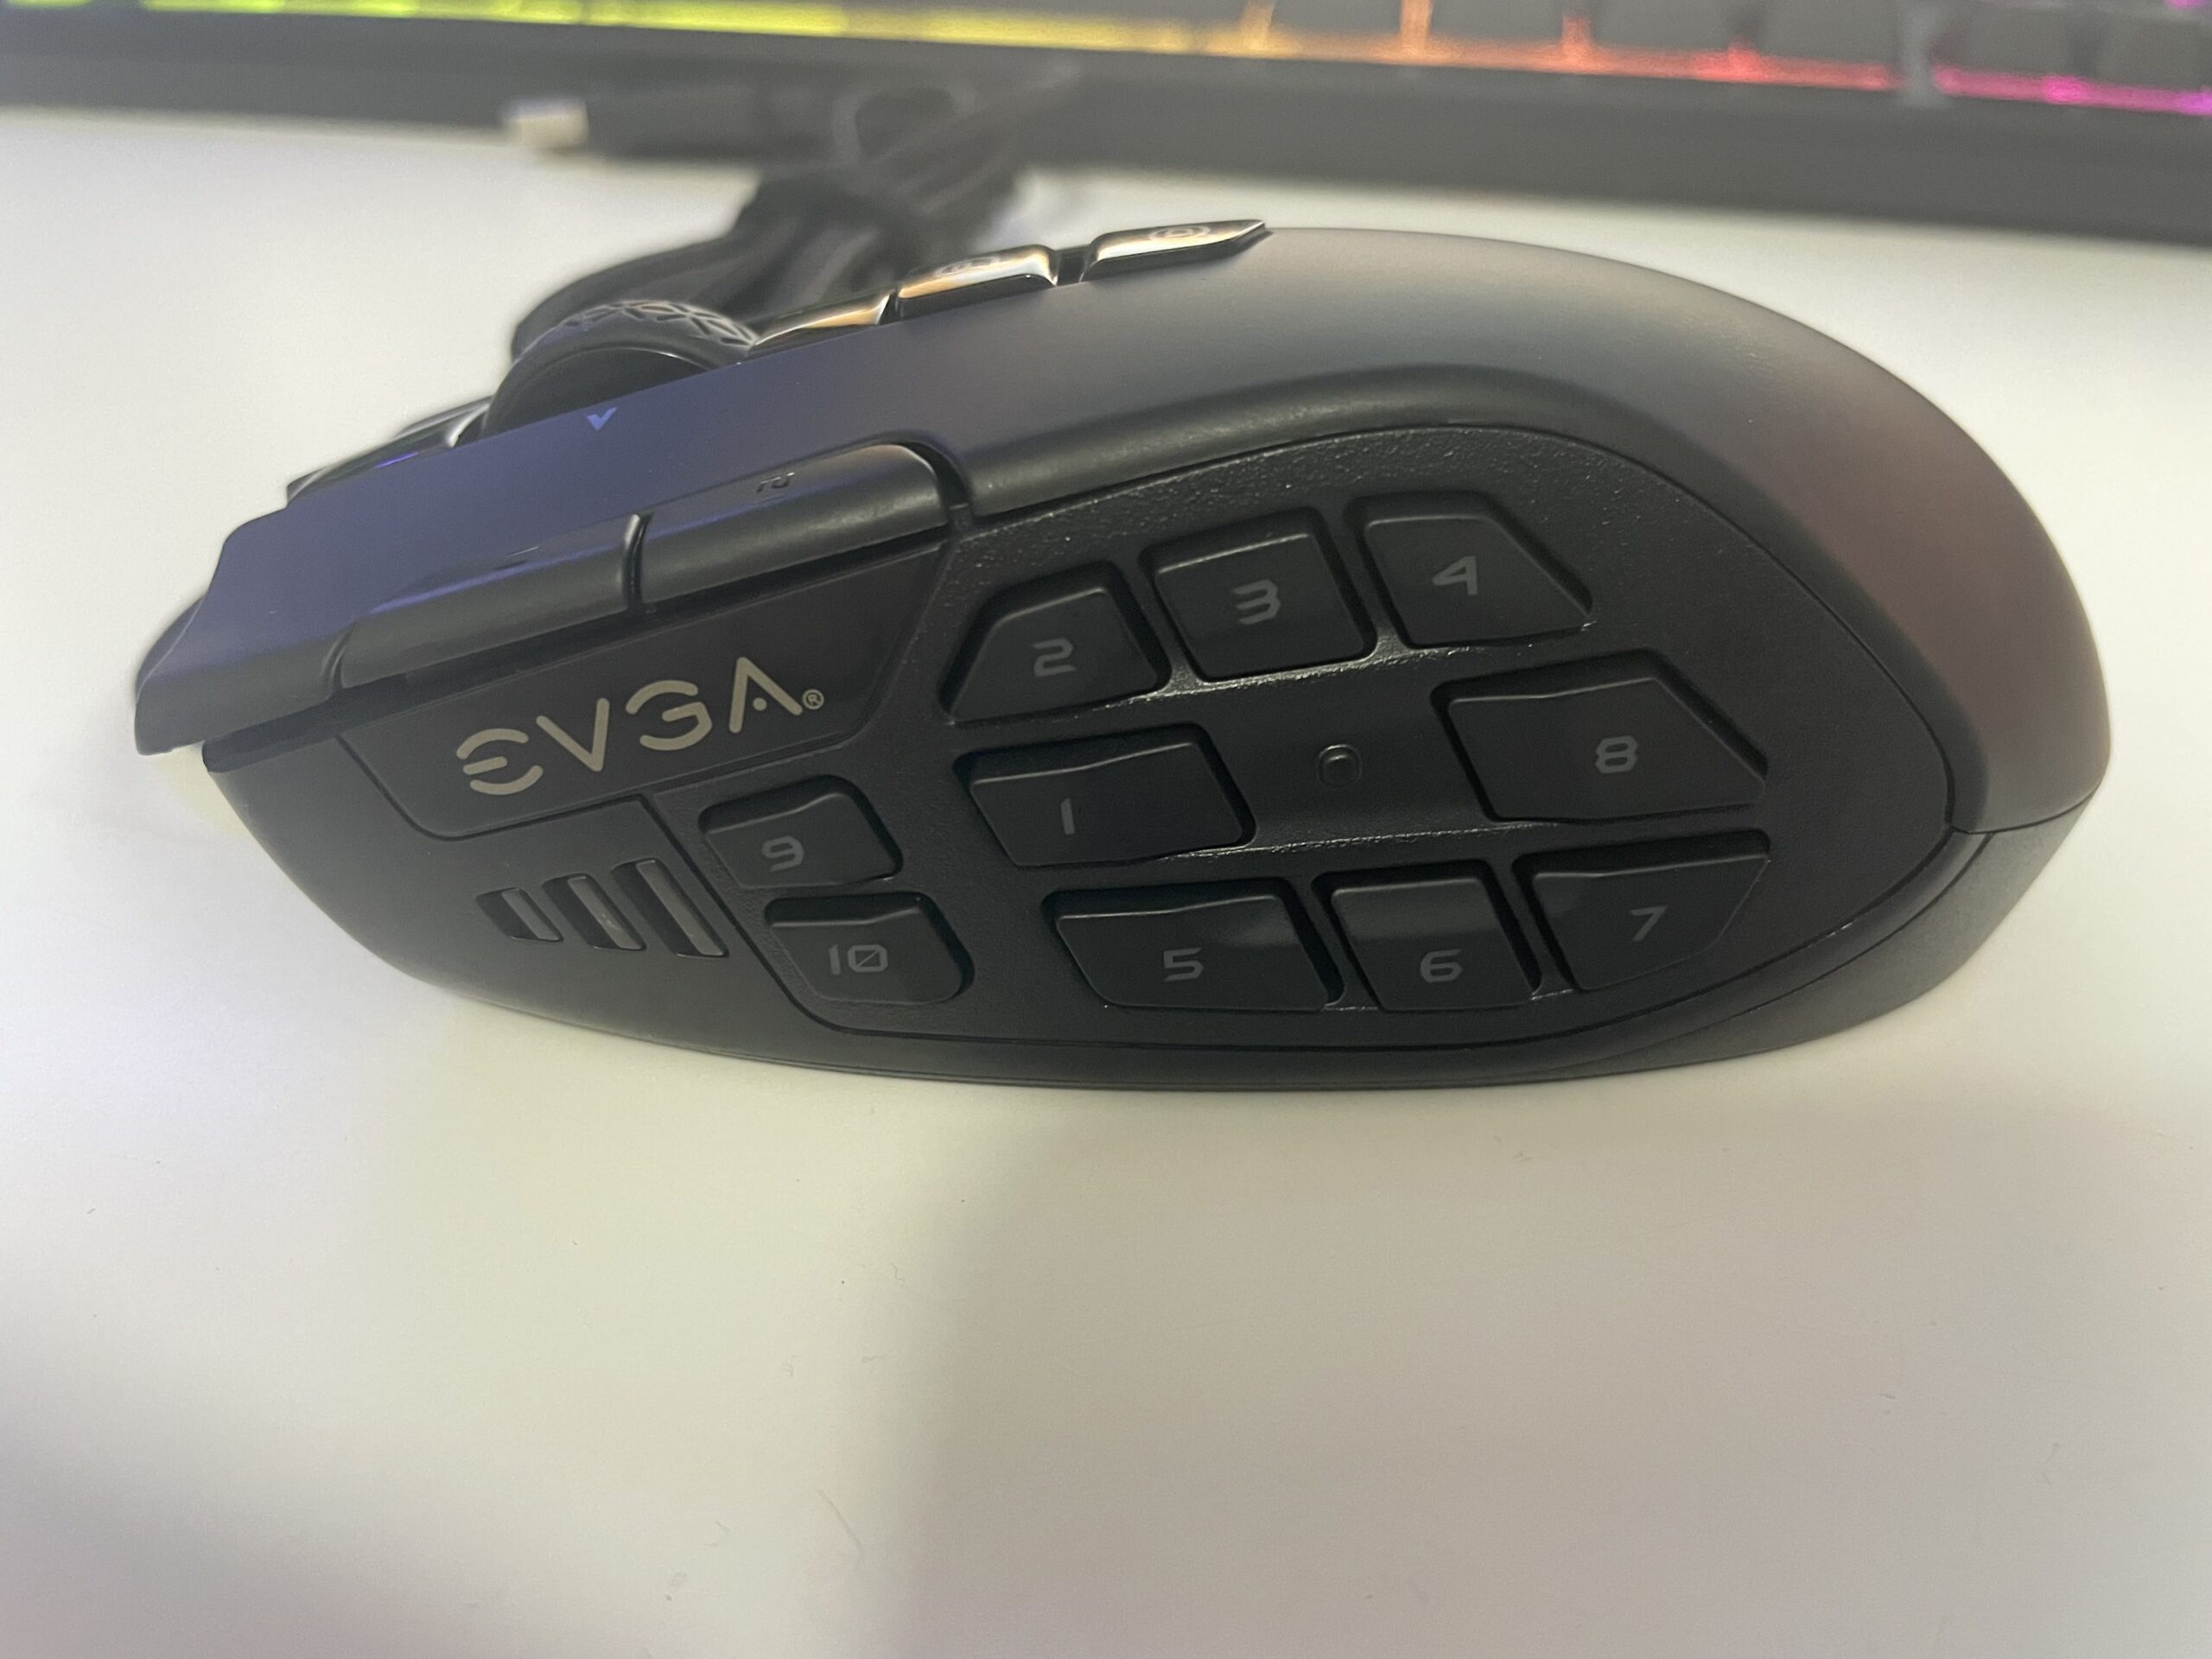 EVGA X15 MMO and EVGA X20 Wireless Mouse Two-in-One Review